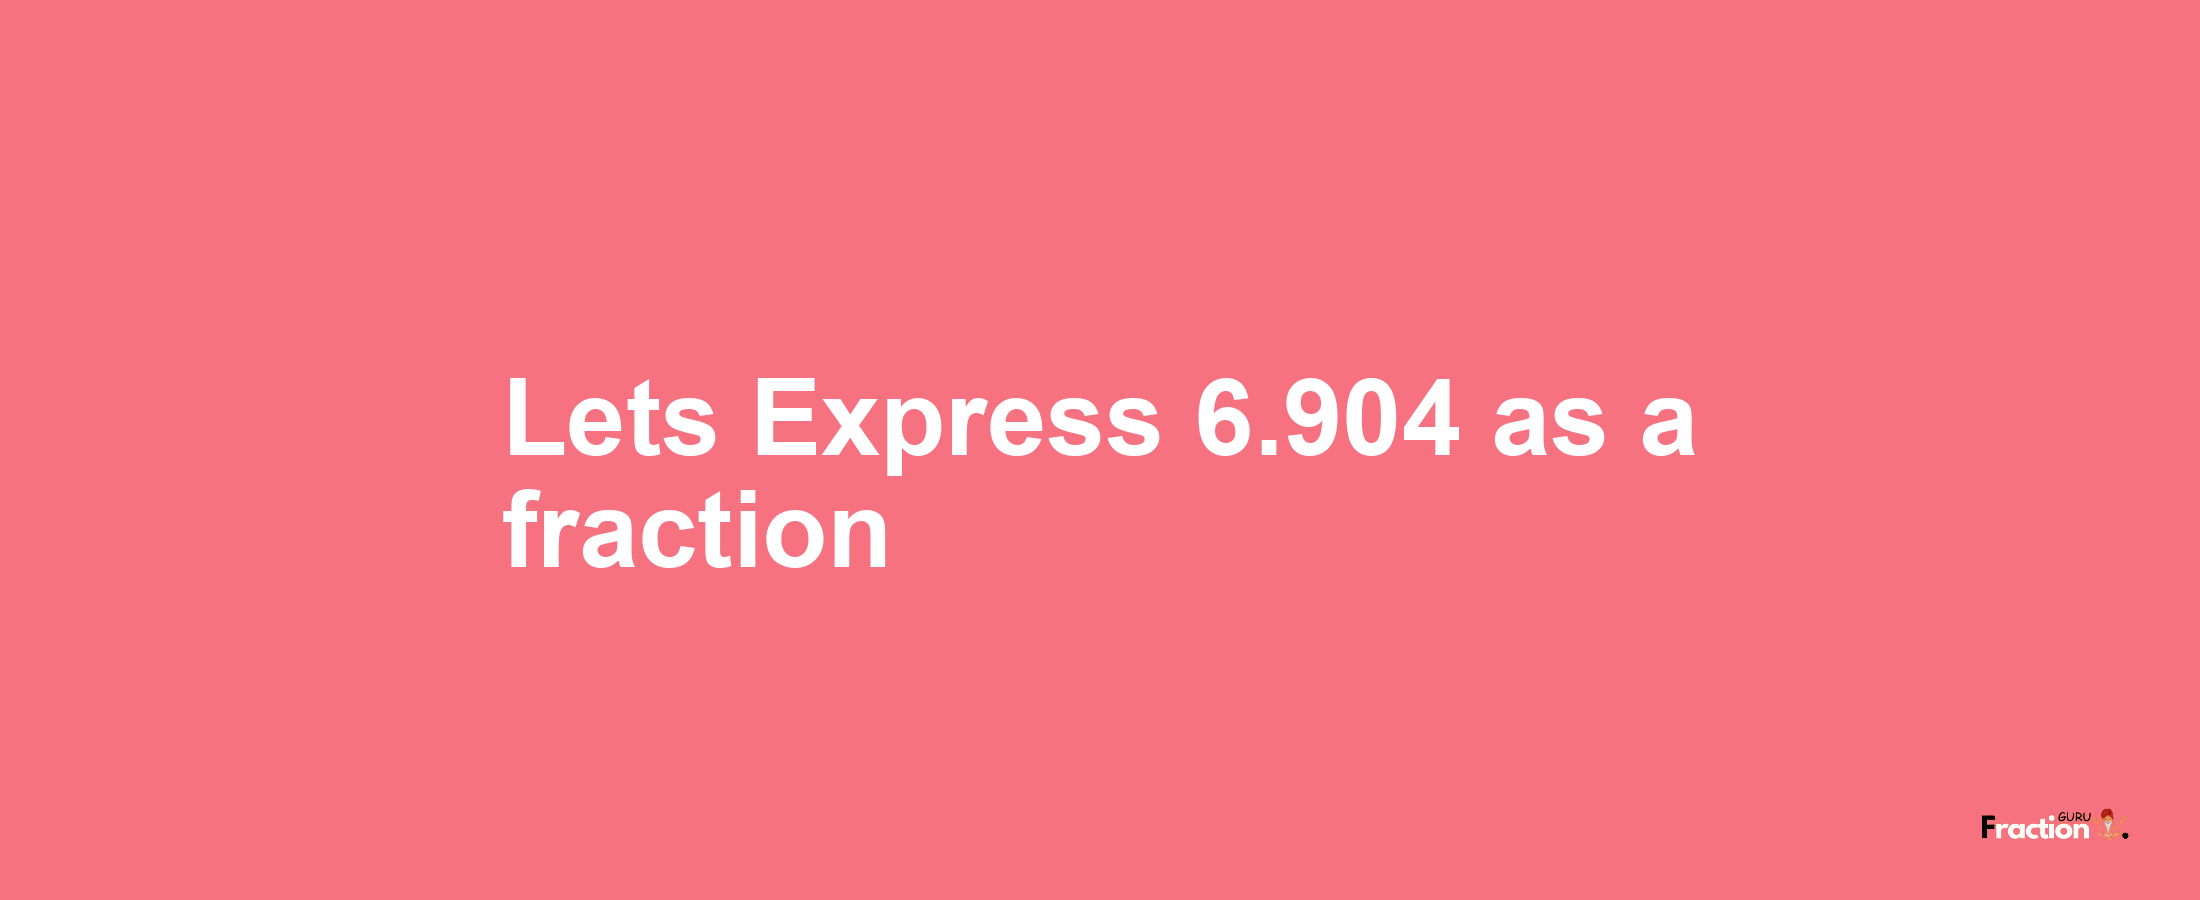 Lets Express 6.904 as afraction